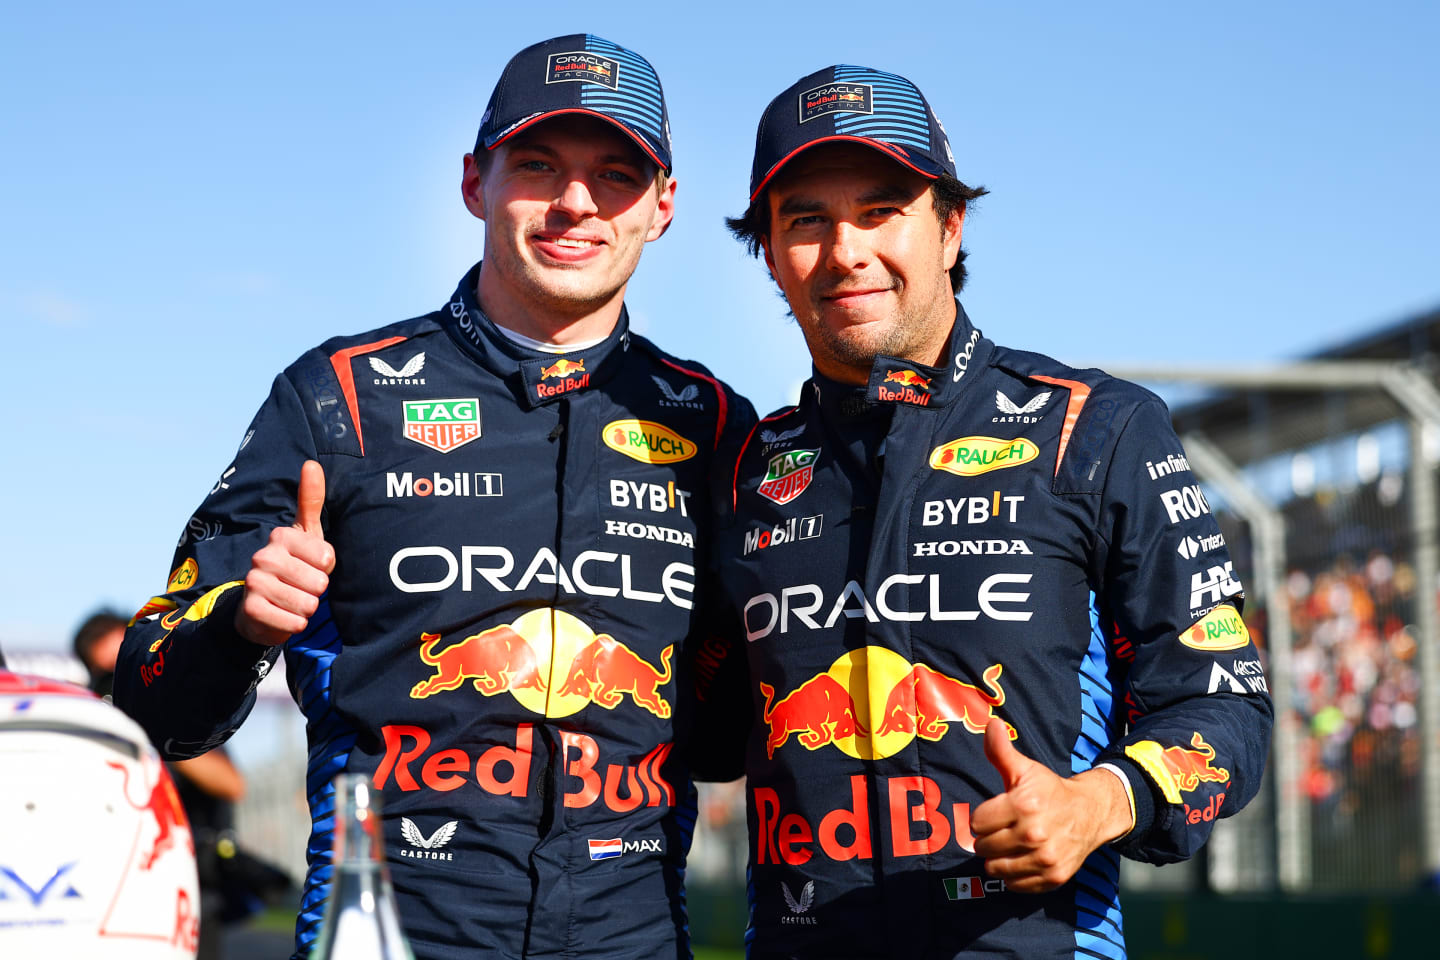 MELBOURNE, AUSTRALIA - MARCH 23: Pole position qualifier Max Verstappen of the Netherlands and Oracle Red Bull Racing and Third placed qualifier Sergio Perez of Mexico and Oracle Red Bull Racing celebrate in parc ferme during qualifying ahead of the F1 Grand Prix of Australia at Albert Park Circuit on March 23, 2024 in Melbourne, Australia. (Photo by Mark Thompson/Getty Images)